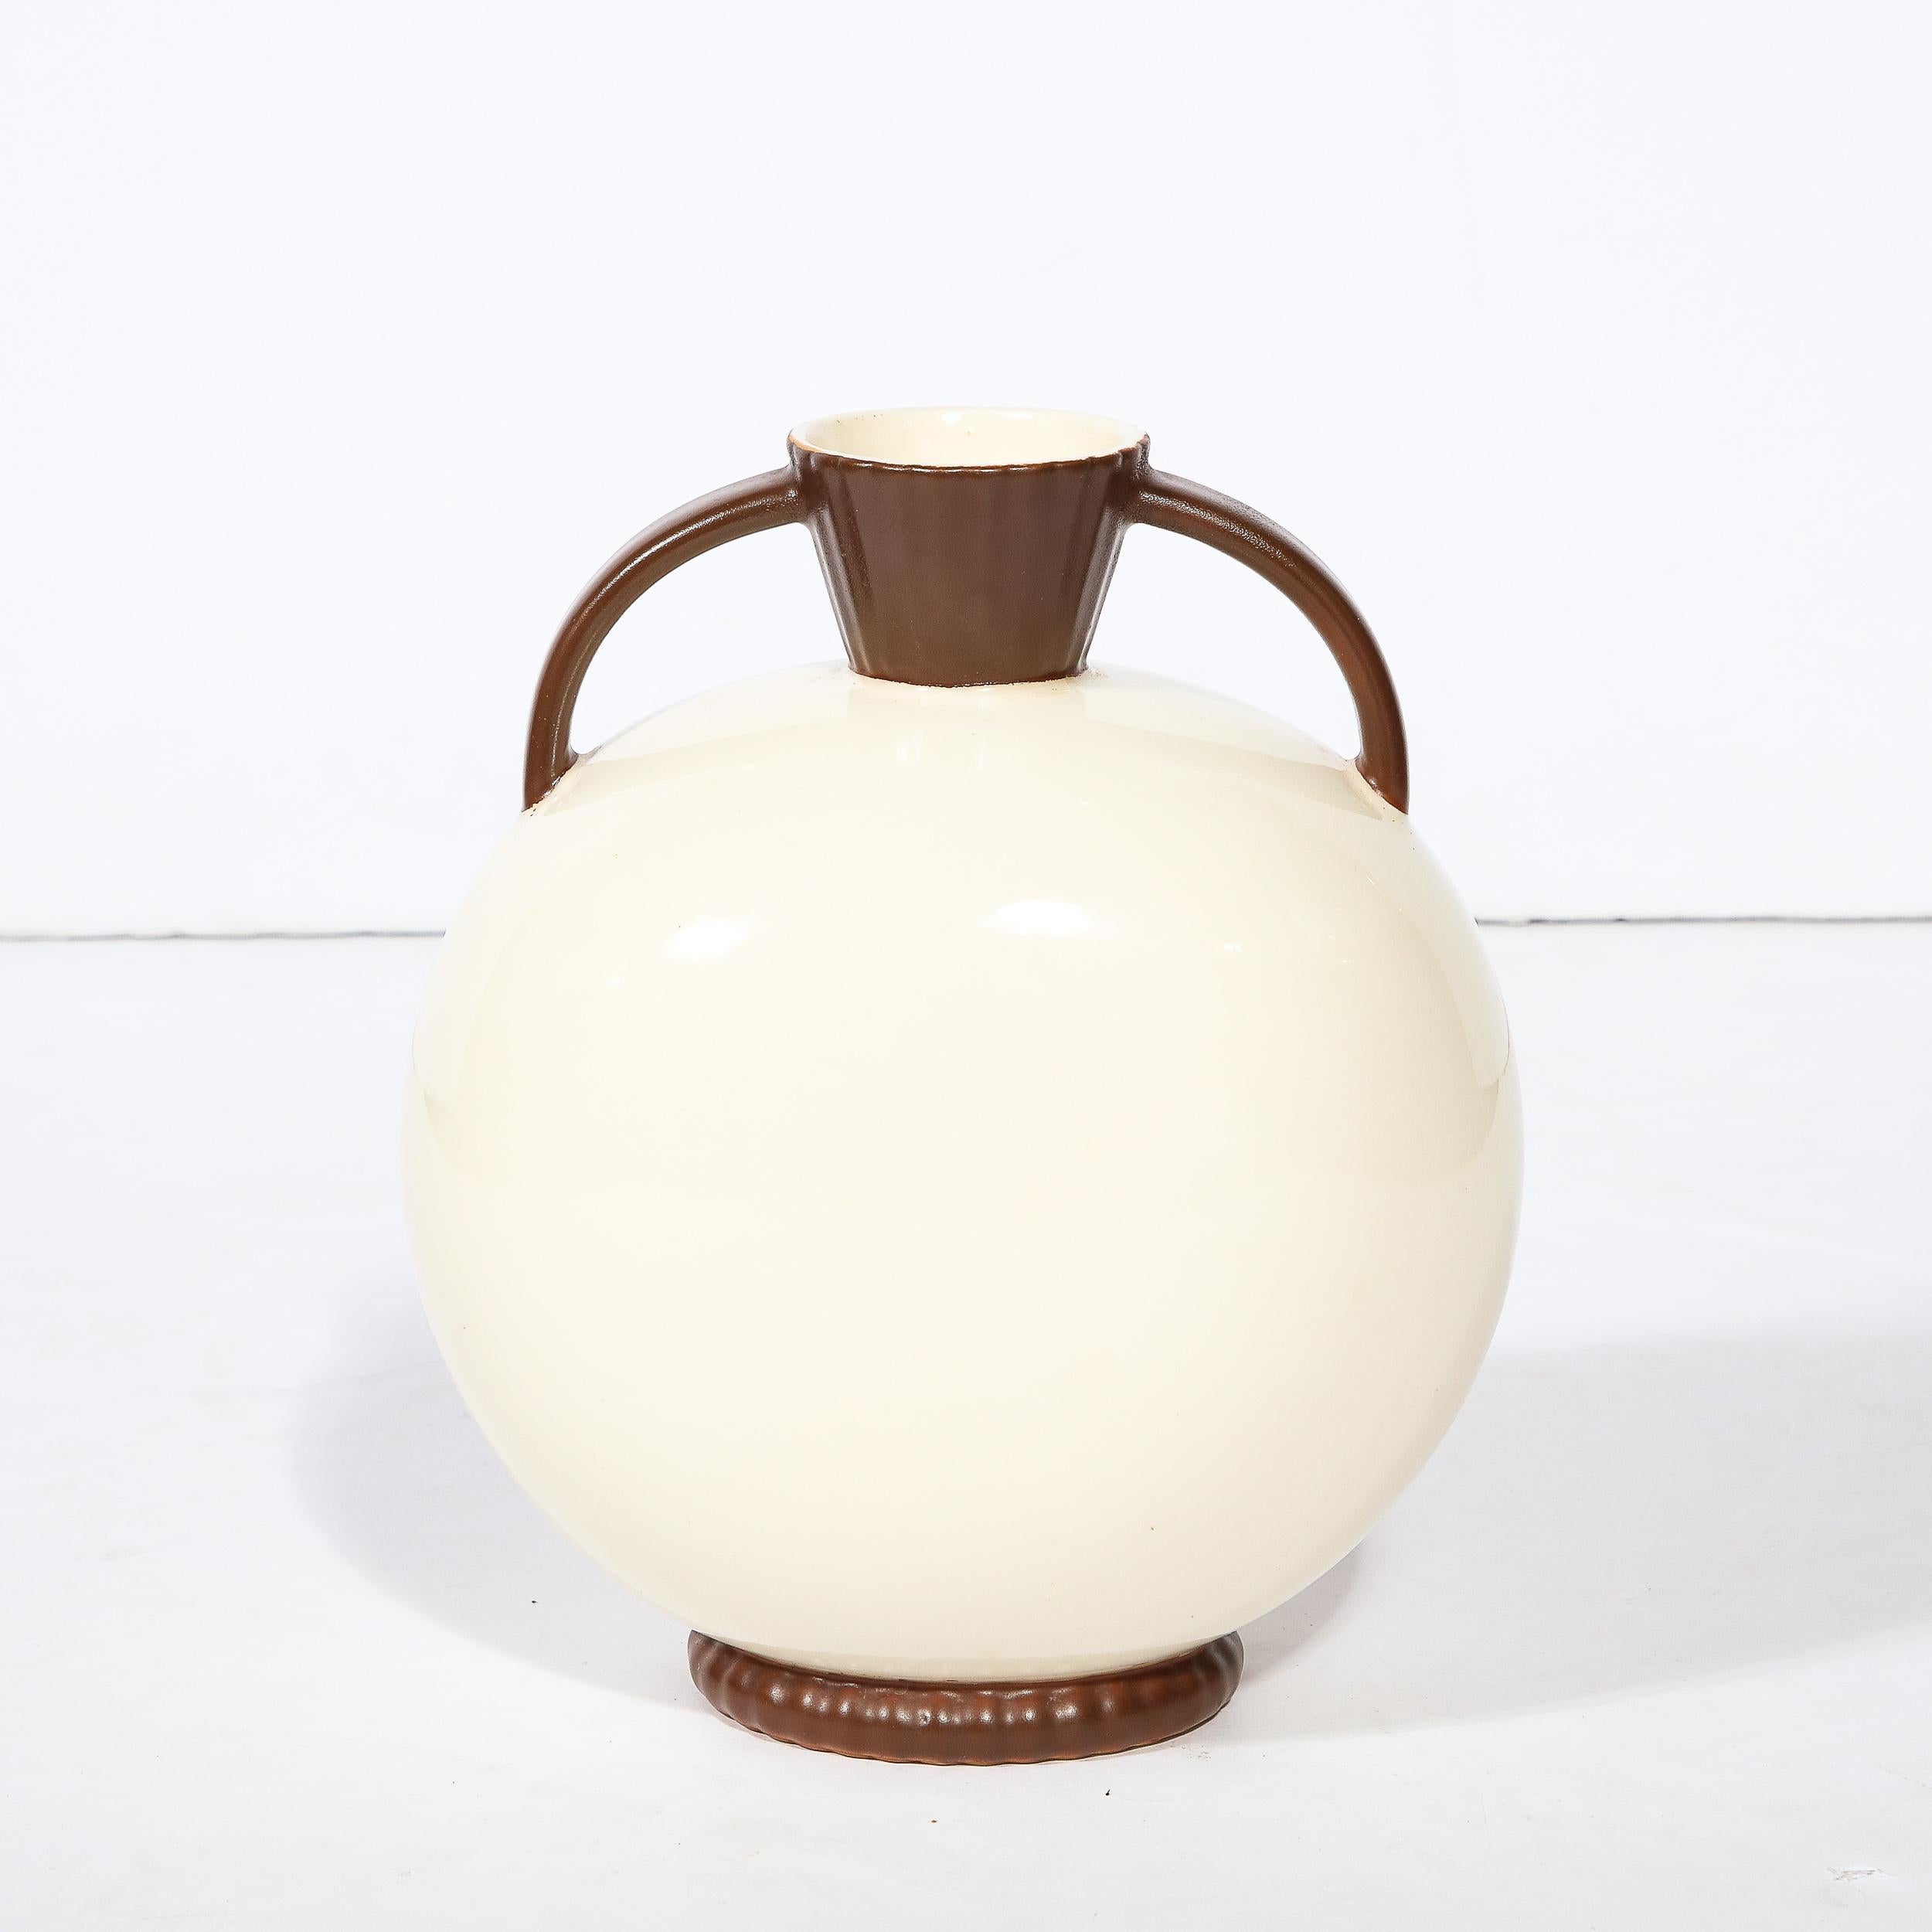 Czecholovakian Art Deco Hand Crafted Cream and Umber Ceramic Vase by Royal Crown For Sale 1